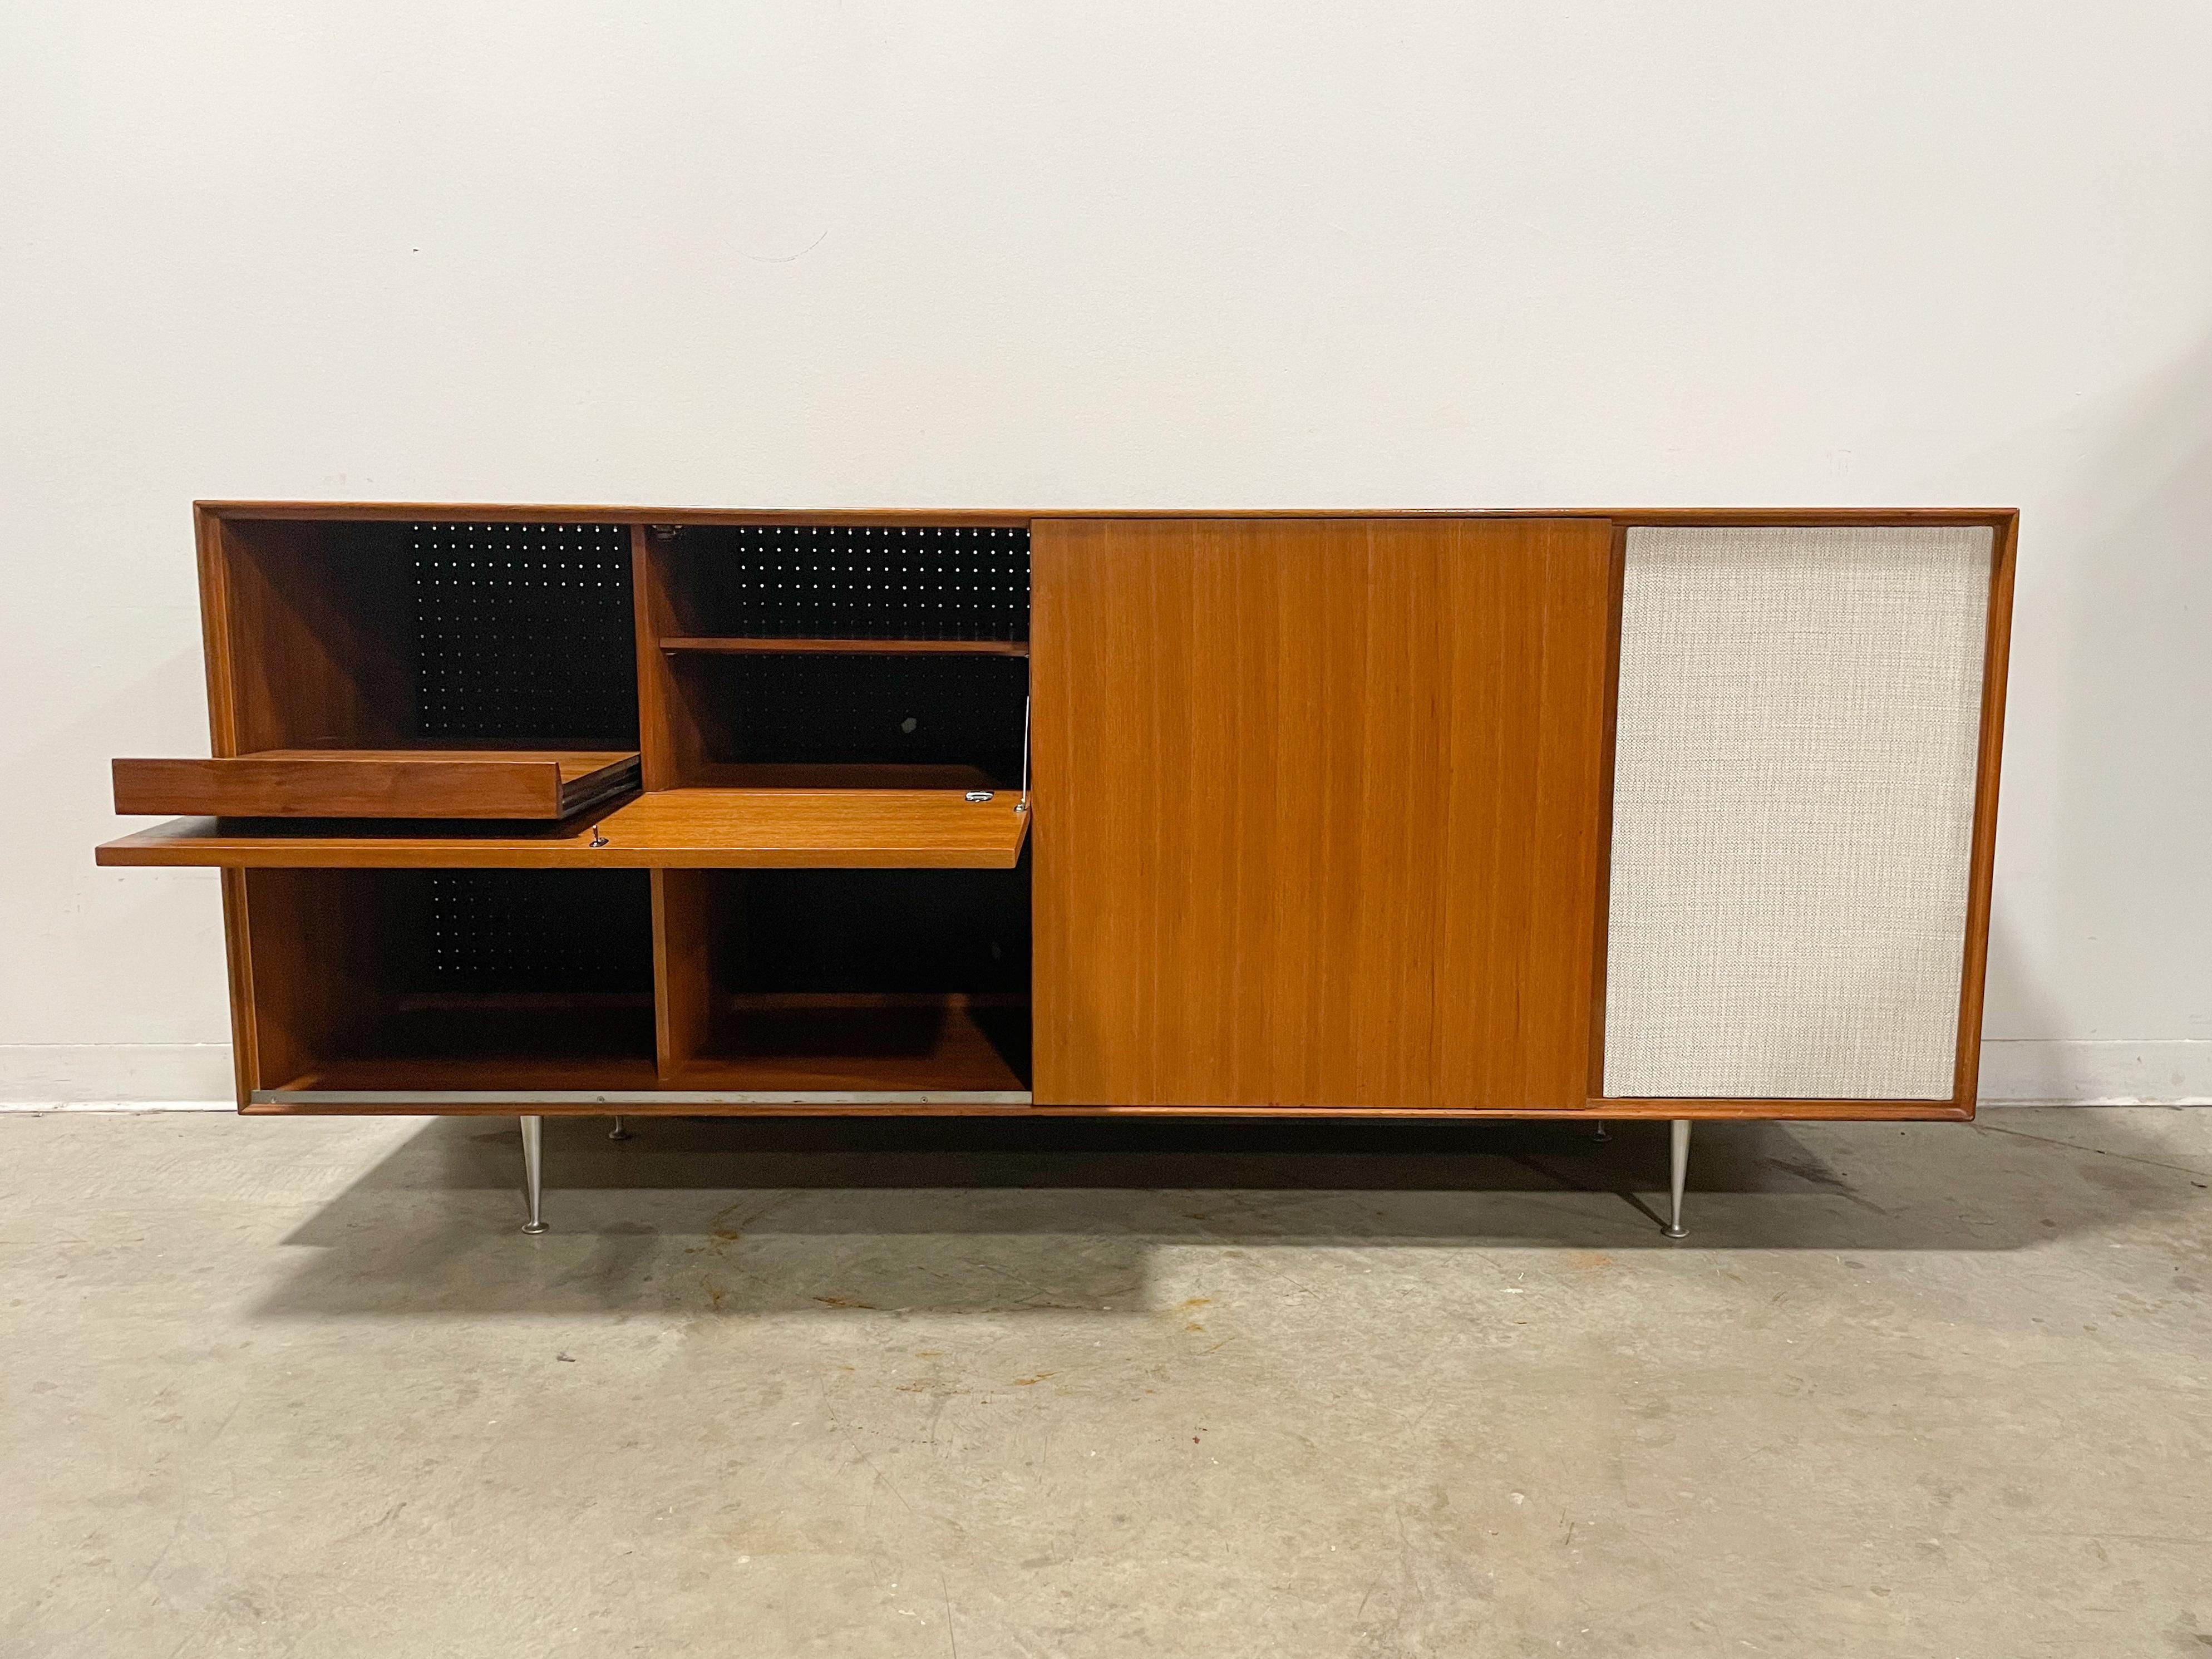 Rare thin edge line record cabinet designed by George Nelson and made by Herman Miller in the 1950s. Walnut case on classic aluminum legs with drop down record player and amplifier section, record storage and component rack. Record player drawer